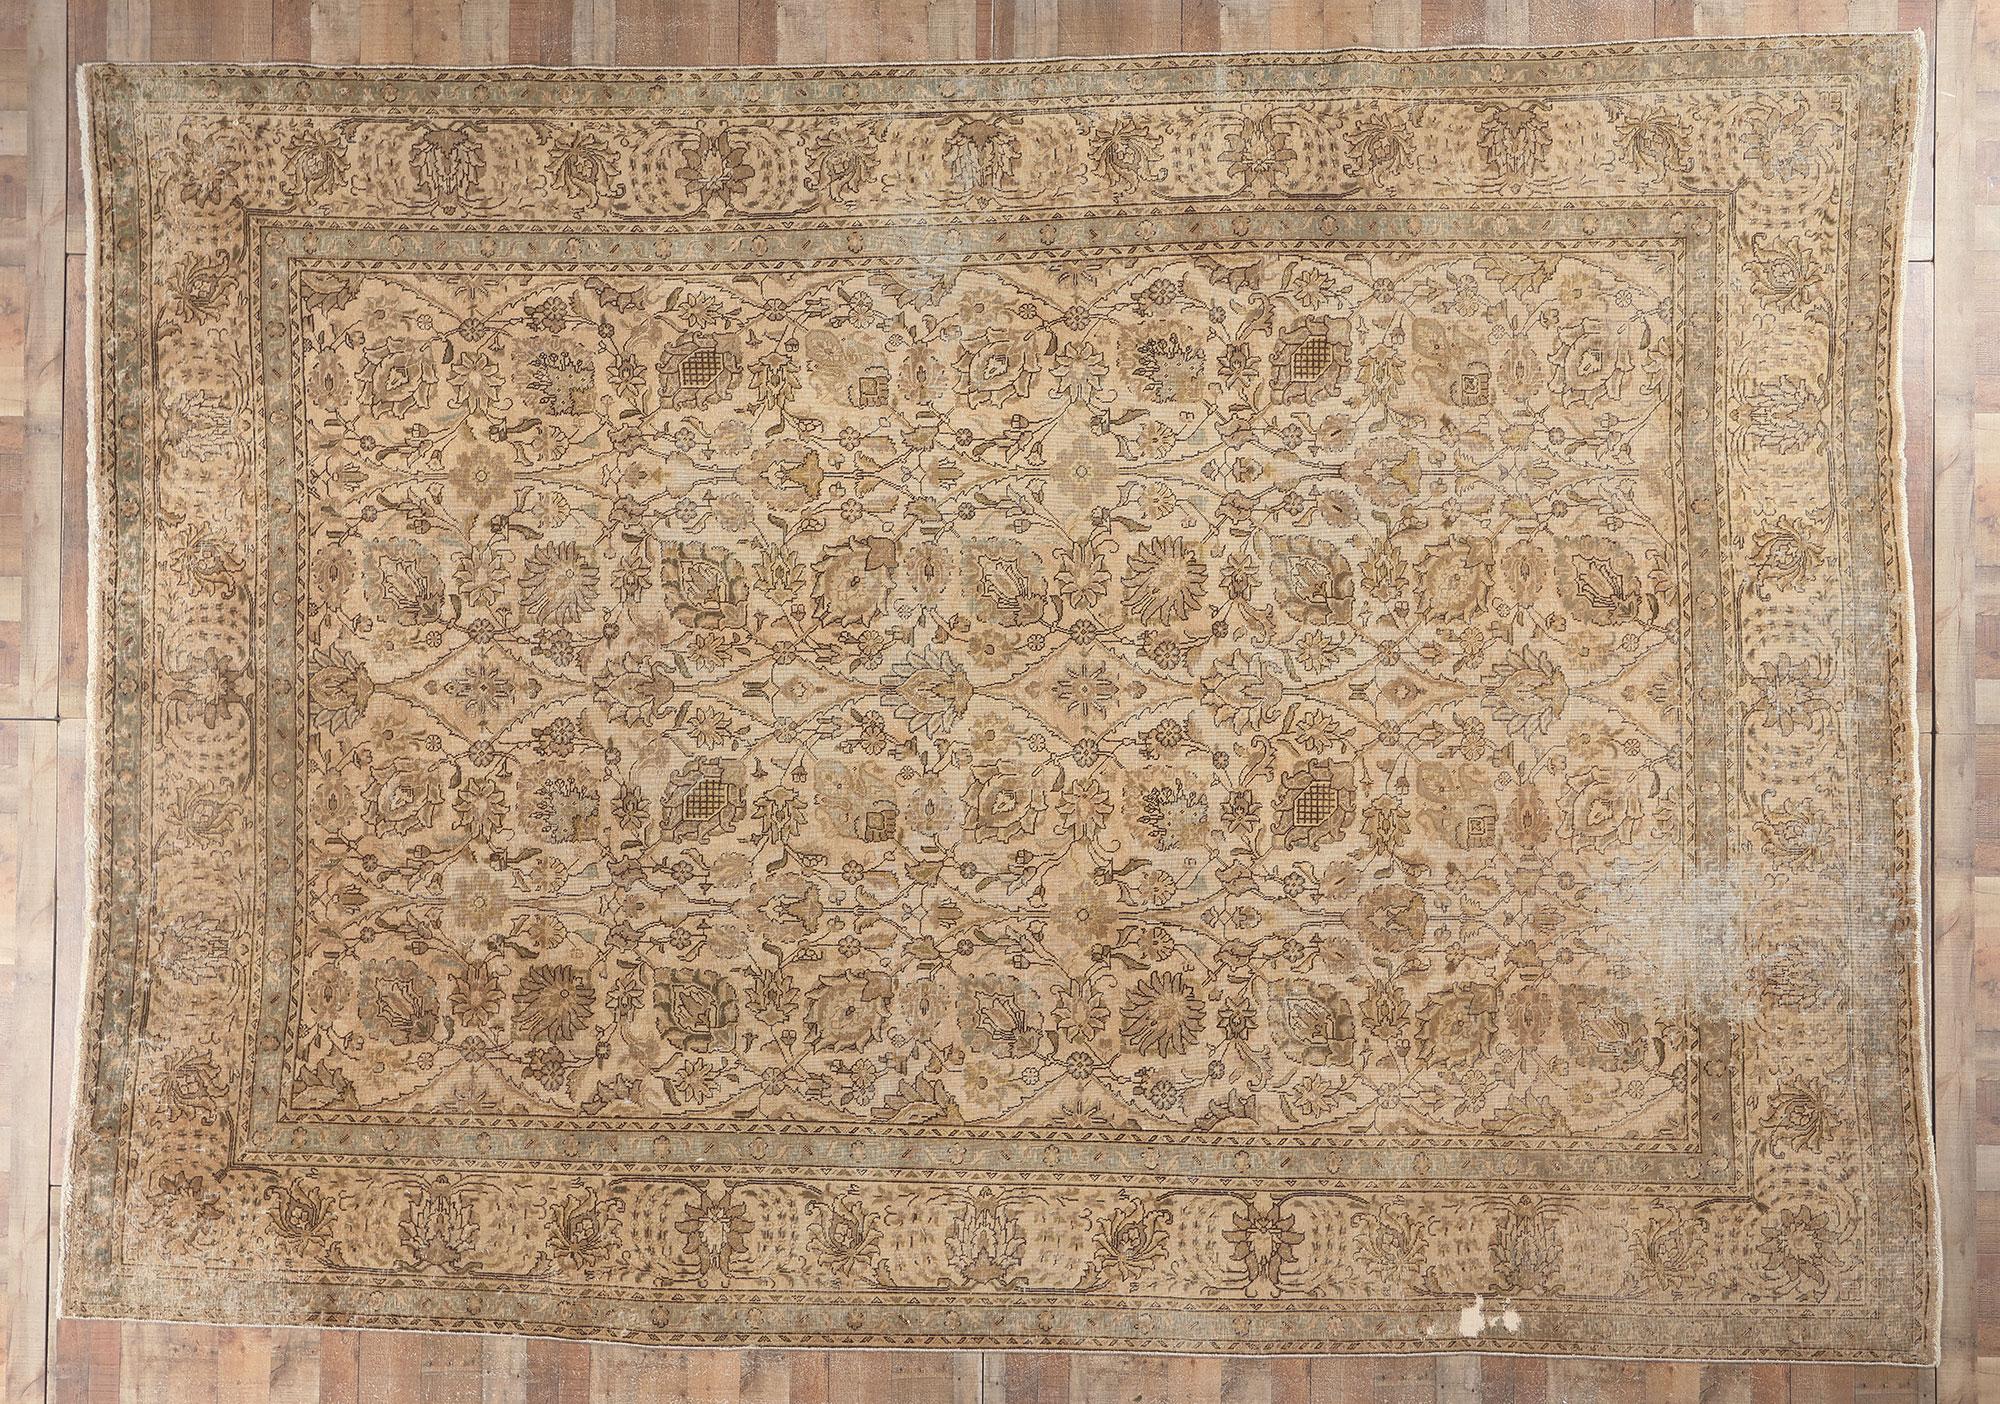 Rustic Vintage Persian Tabriz Rug Warm Neutral Earth-Tone Colors For Sale 2